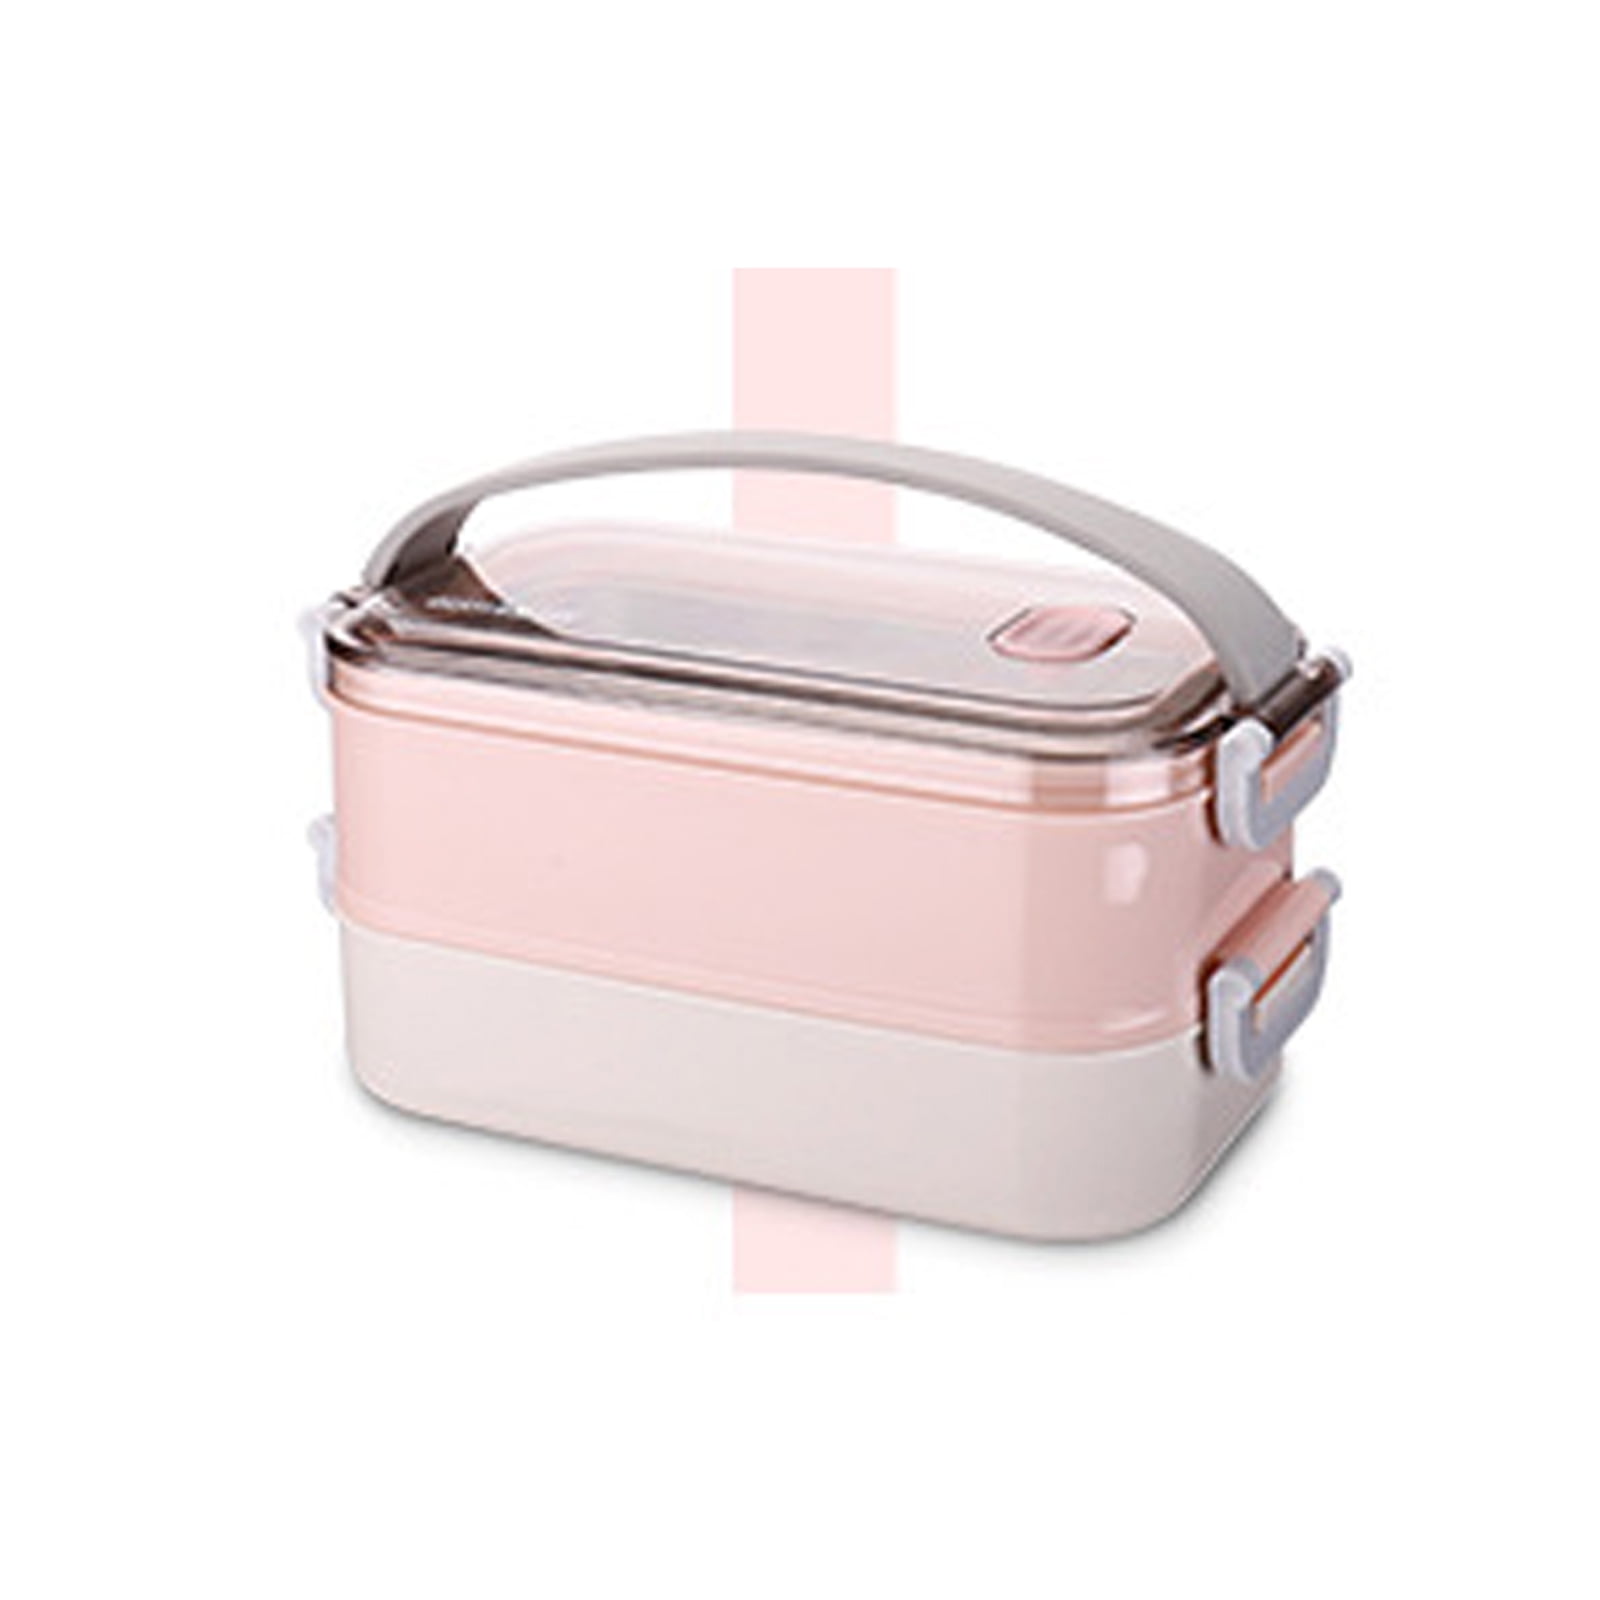 Details about   Thermal Insulated Lunch Box Thermos Food Container Multiple Tier Lunch Box Jar